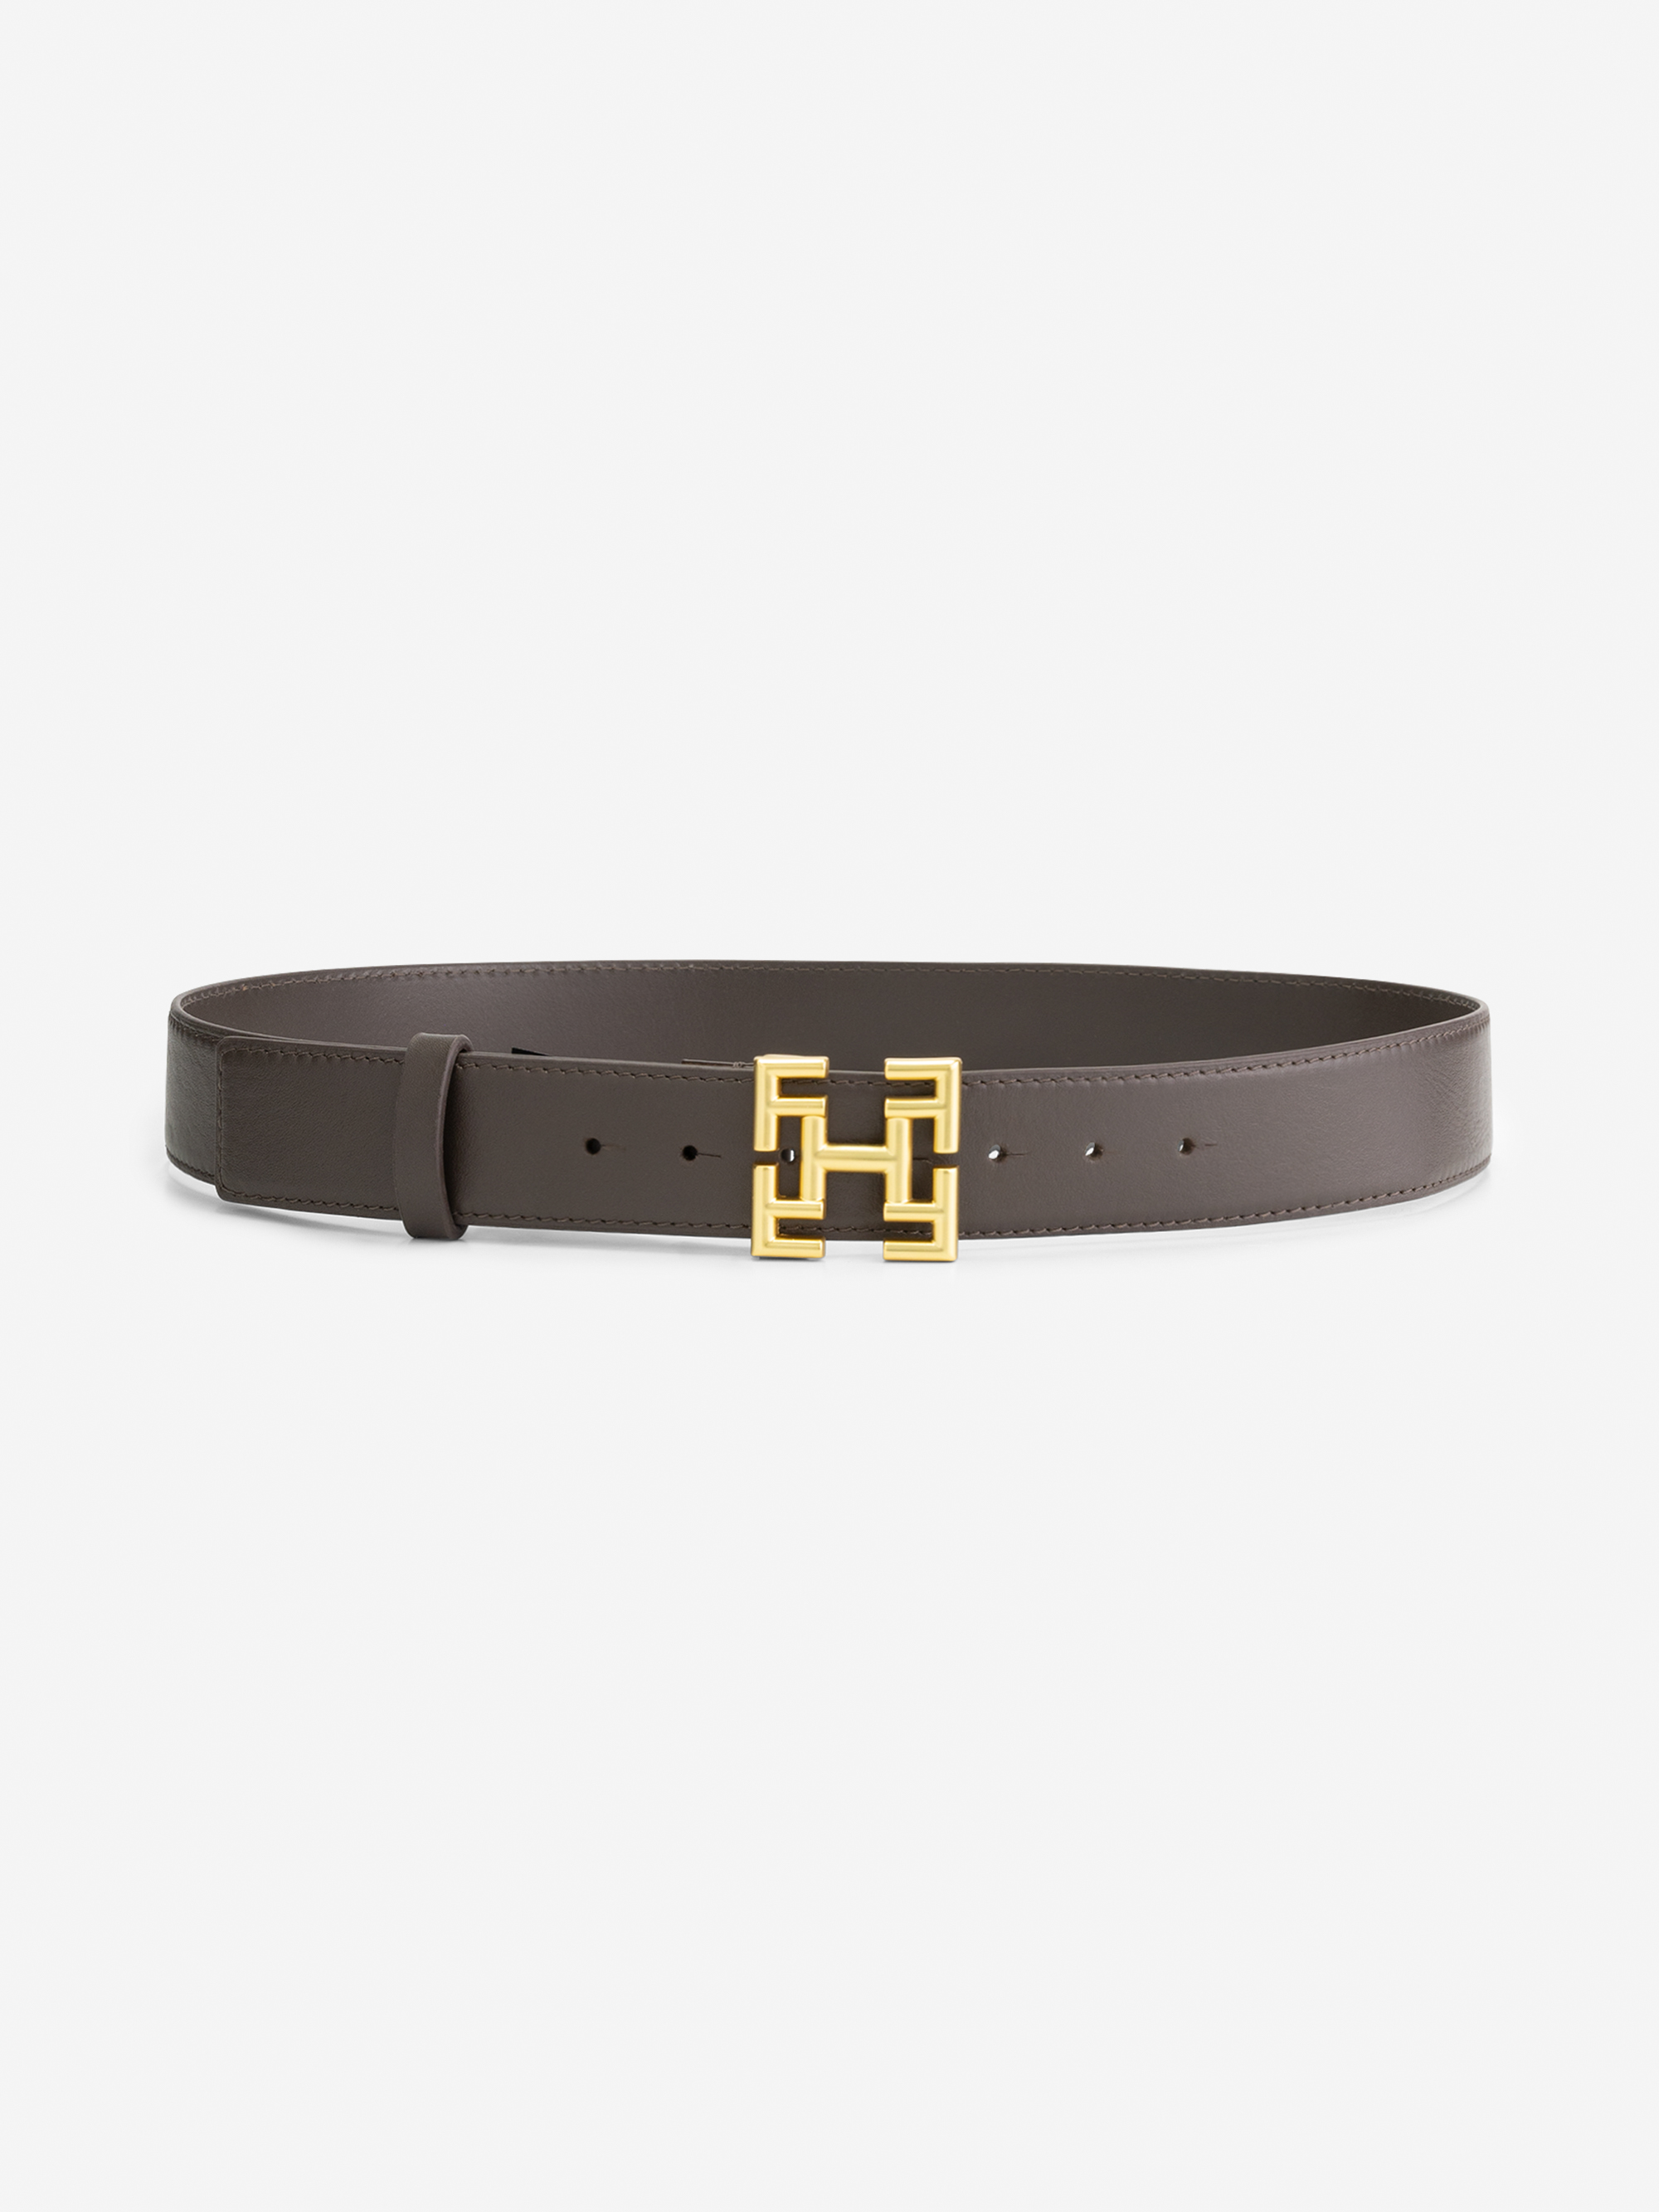  Small Leather waist belt with logo buckle